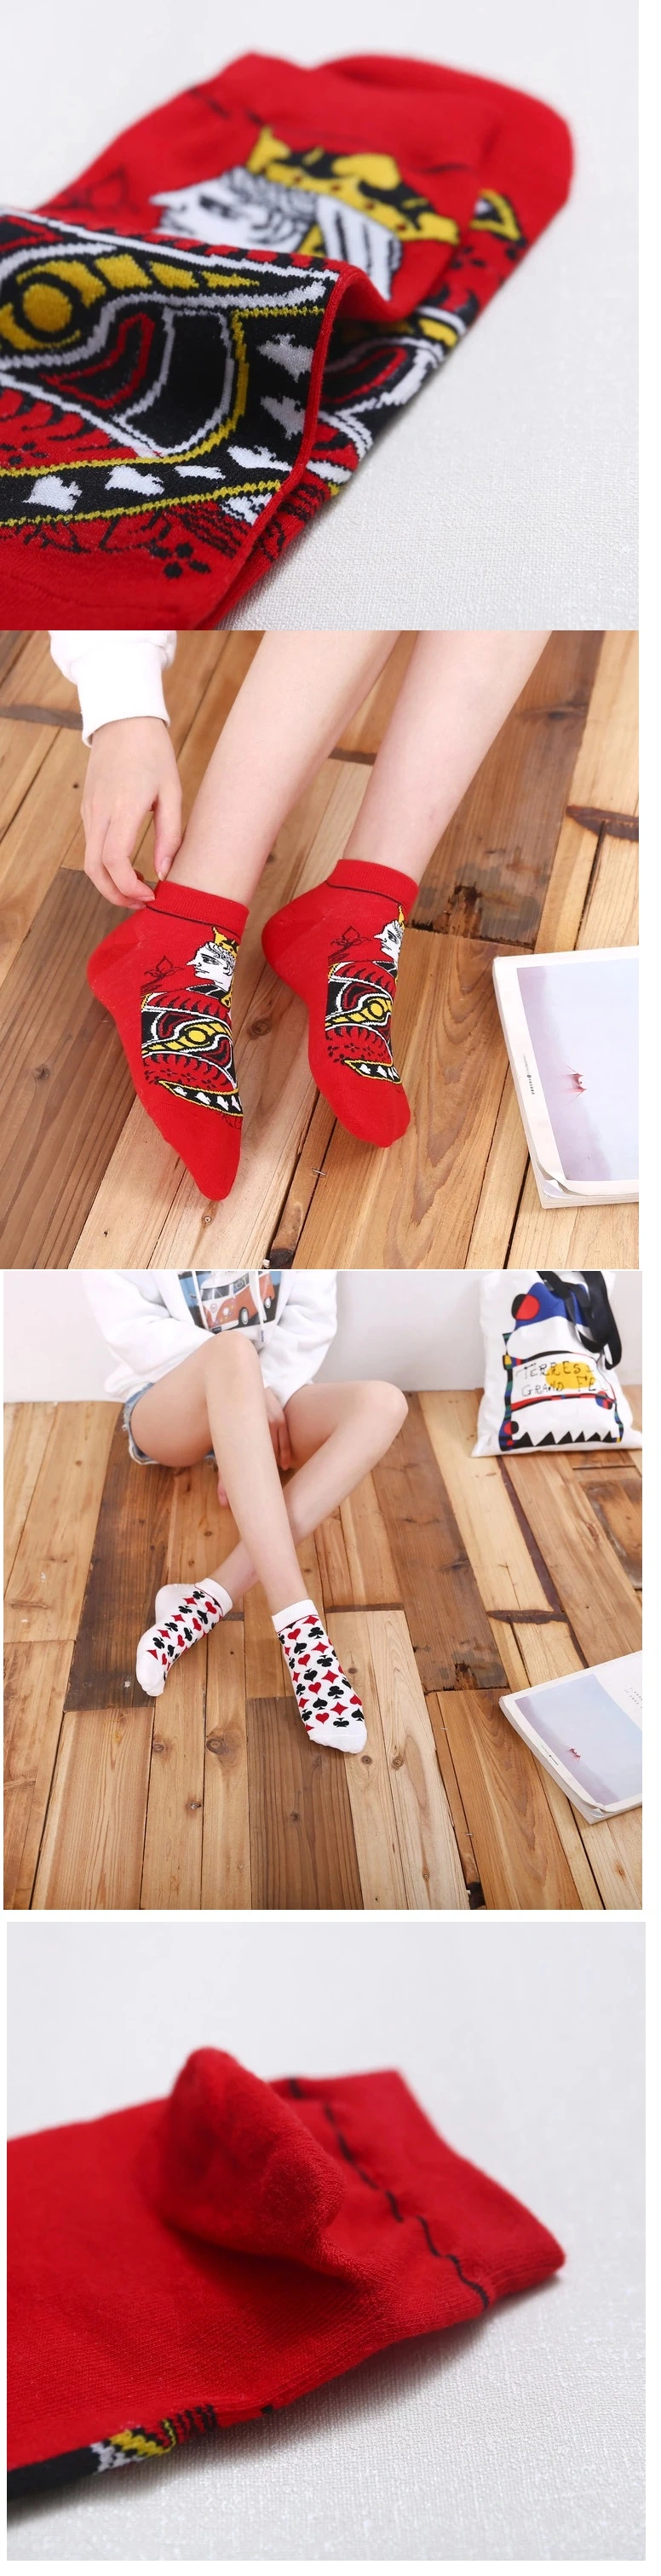 New Arrive Women Best Fashion Ankle Stockings Printed Embroidery Beautiful Design High Quality Ladies Ankle Socks